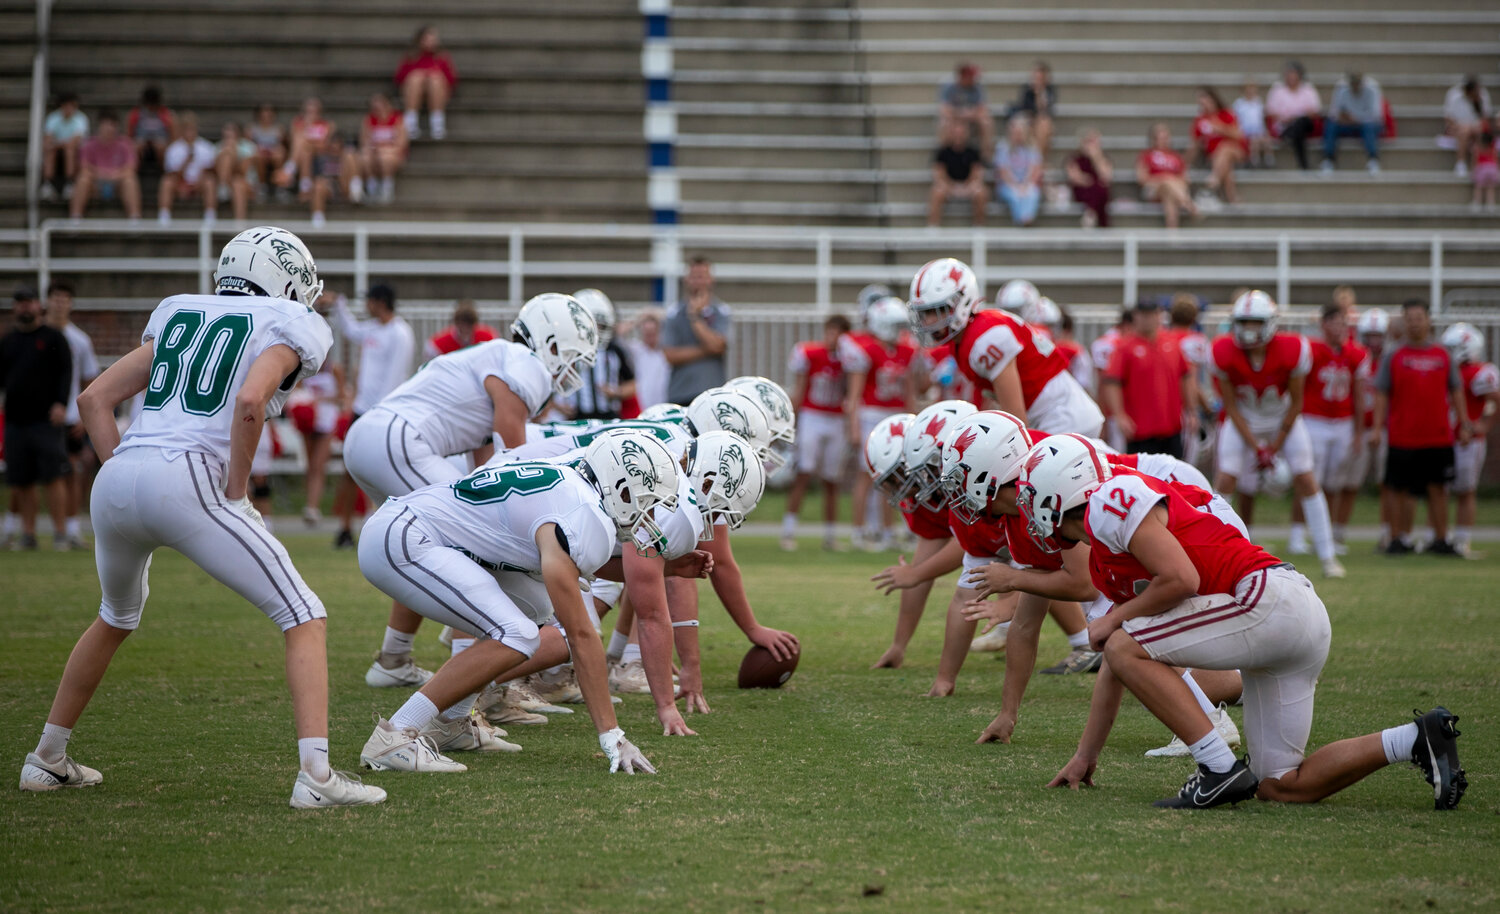 The Bayshore Christian Eagles and St. Michael Cardinals met at Fairhope Municipal Stadium on Monday, Sept. 25, in JV action where the first-year program from Bayshore Christian played its first game in its hometown of Fairhope.